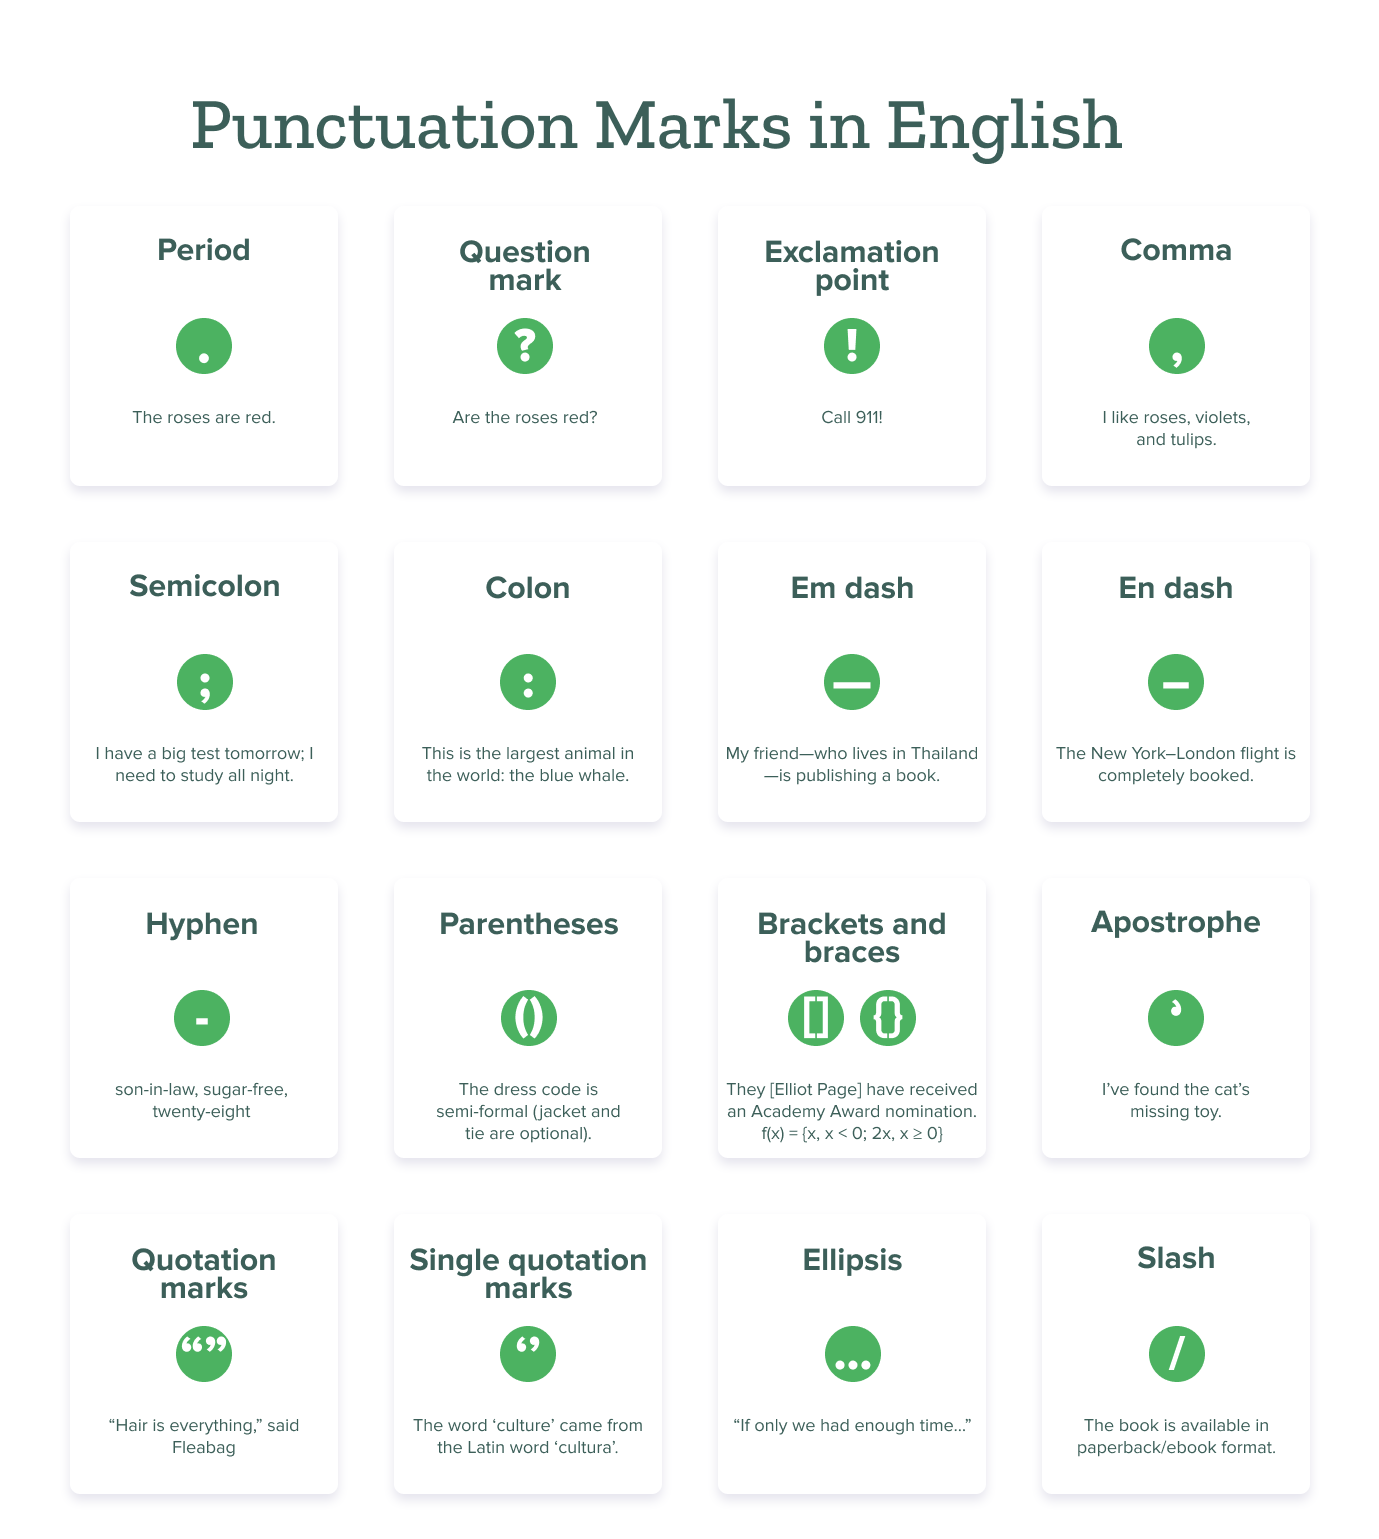 Pictures of punctuation marks in a chart with examples. Get the complete punctuation marks list and learn how to use each one.